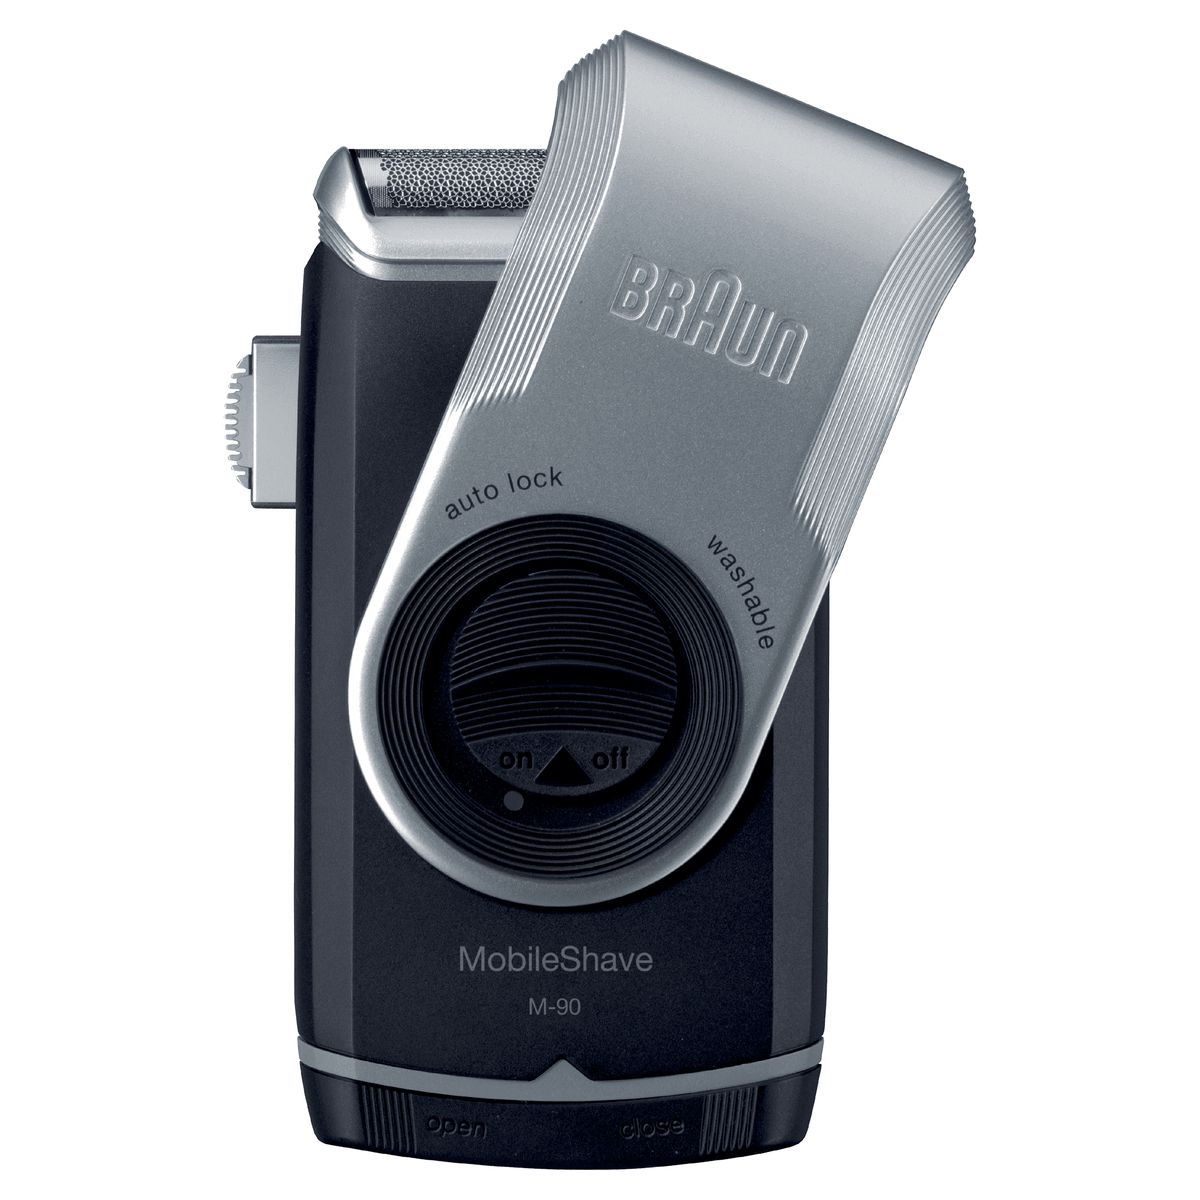 Braun MobileShave electric shaver M-90 on the go, black/silver